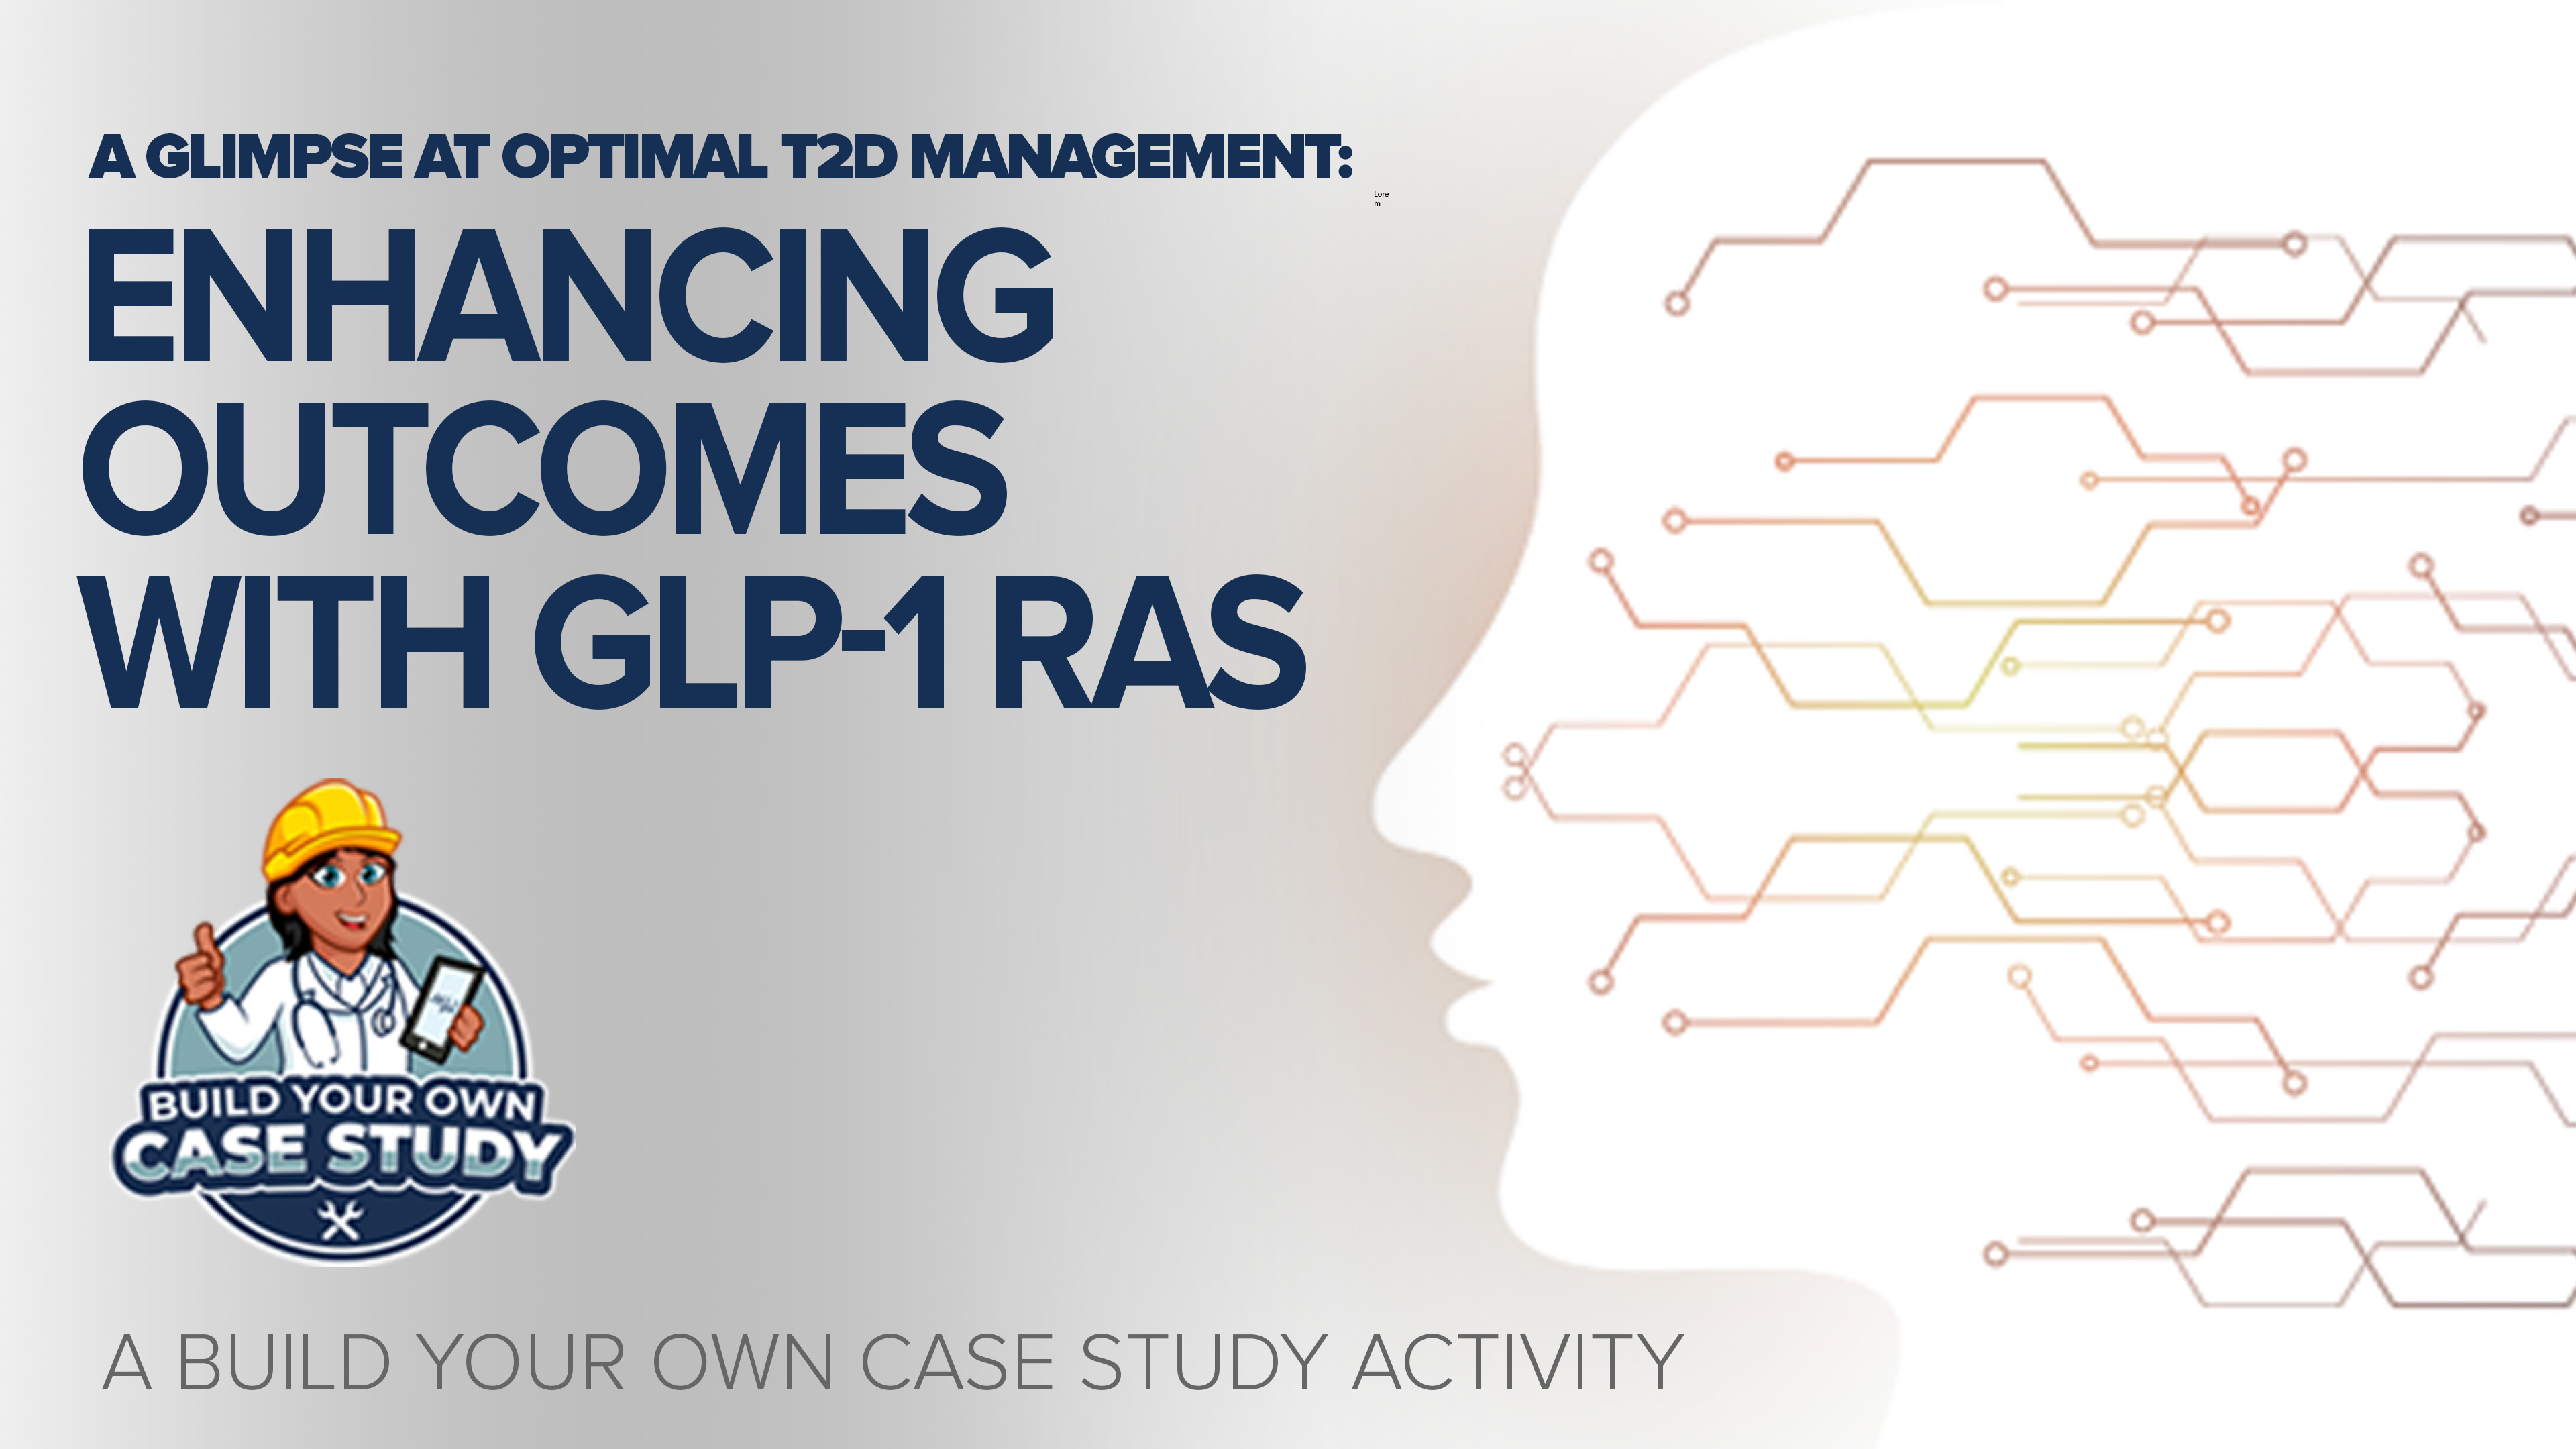 Build Your Own Case Study: A Glimpse at Optimal T2D Management: Enhancing Outcomes with GLP-1 RAs